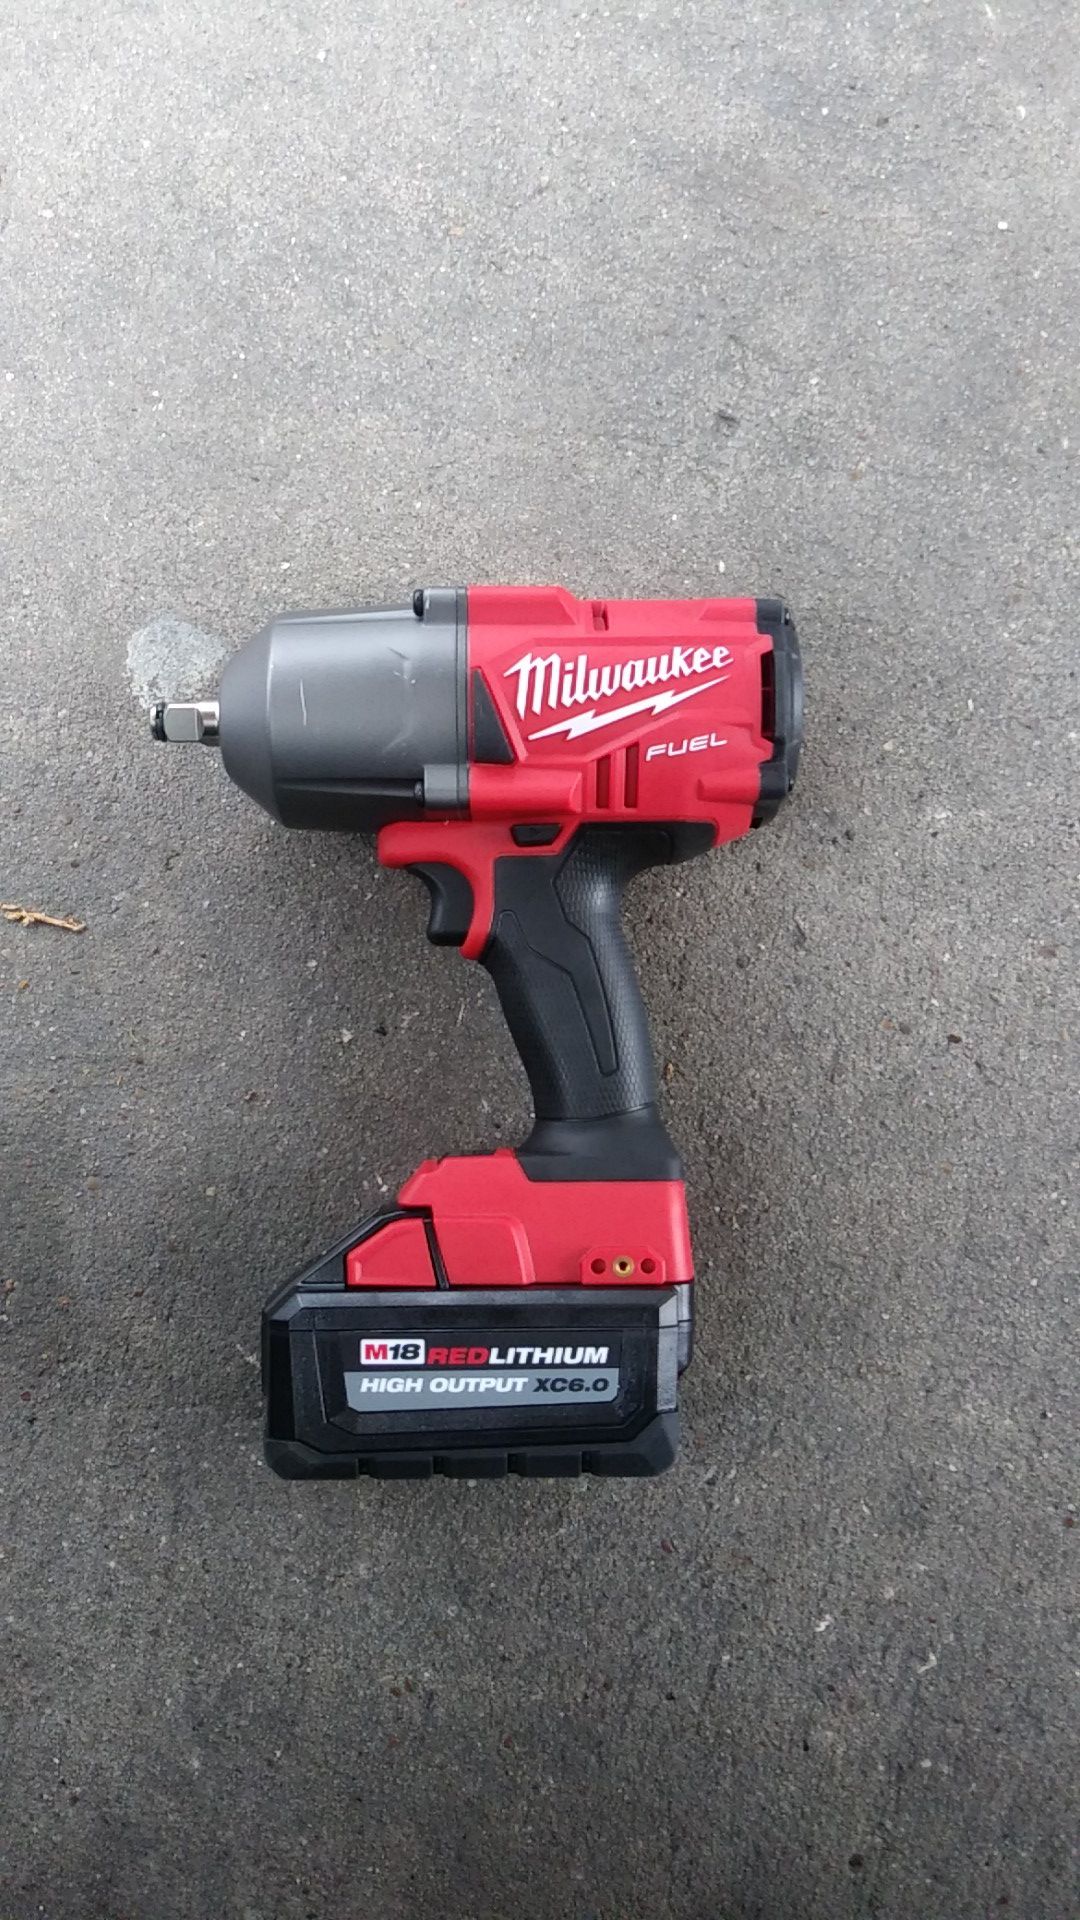 Milwaukee M18 Impact Wrench with 6.0 High Output Battery